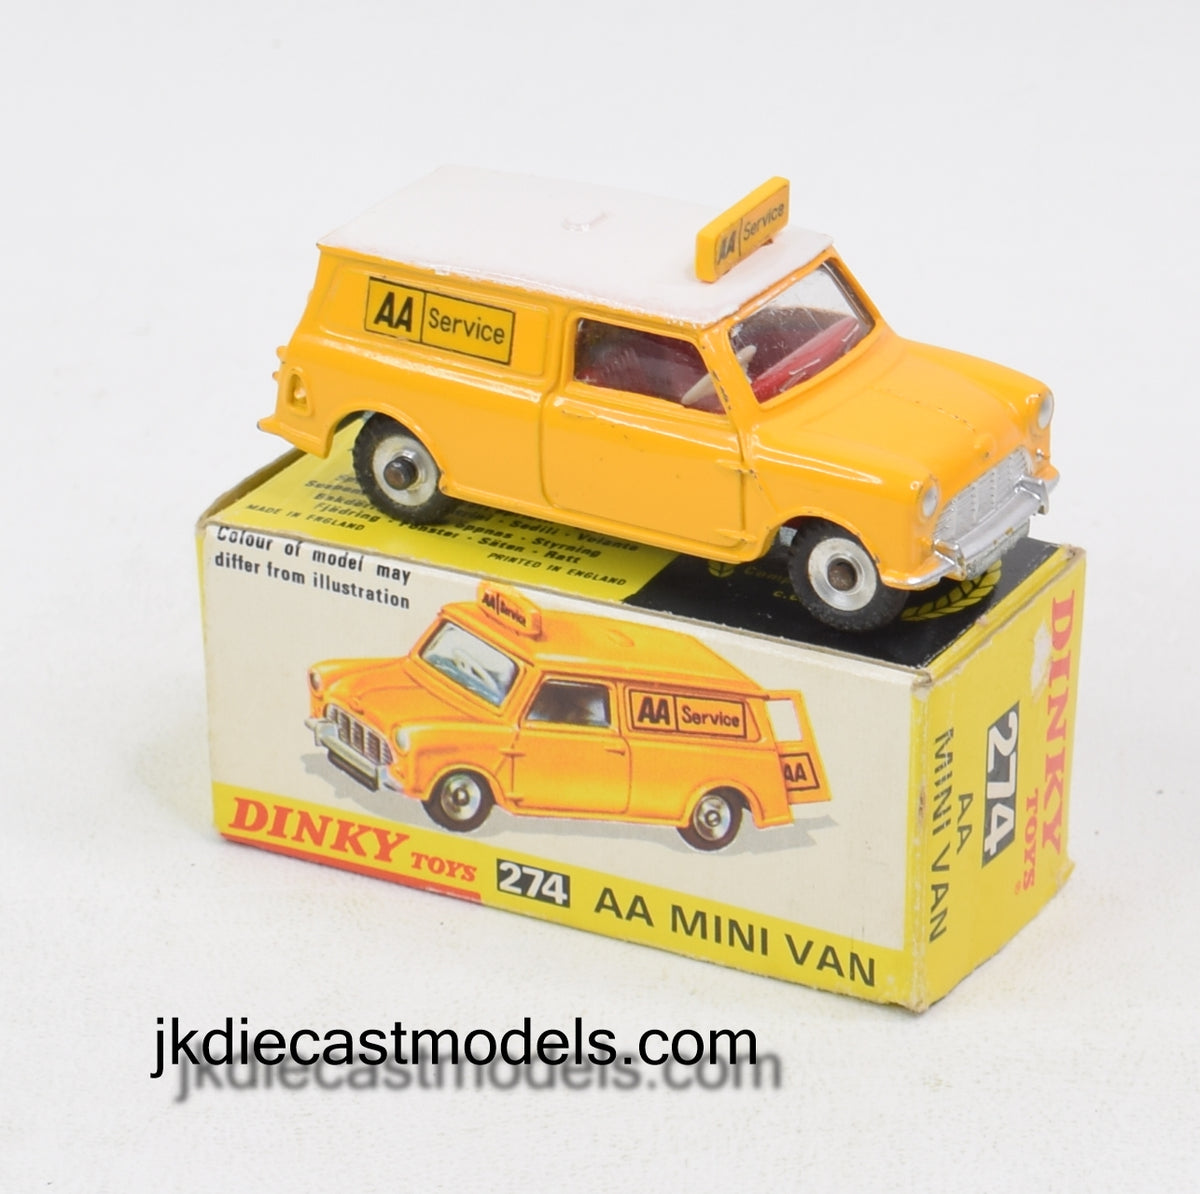 Dinky Toys 274 A.A Minivan Very Near Mint/Boxed (Red Interior) 'Avonmore Collection'